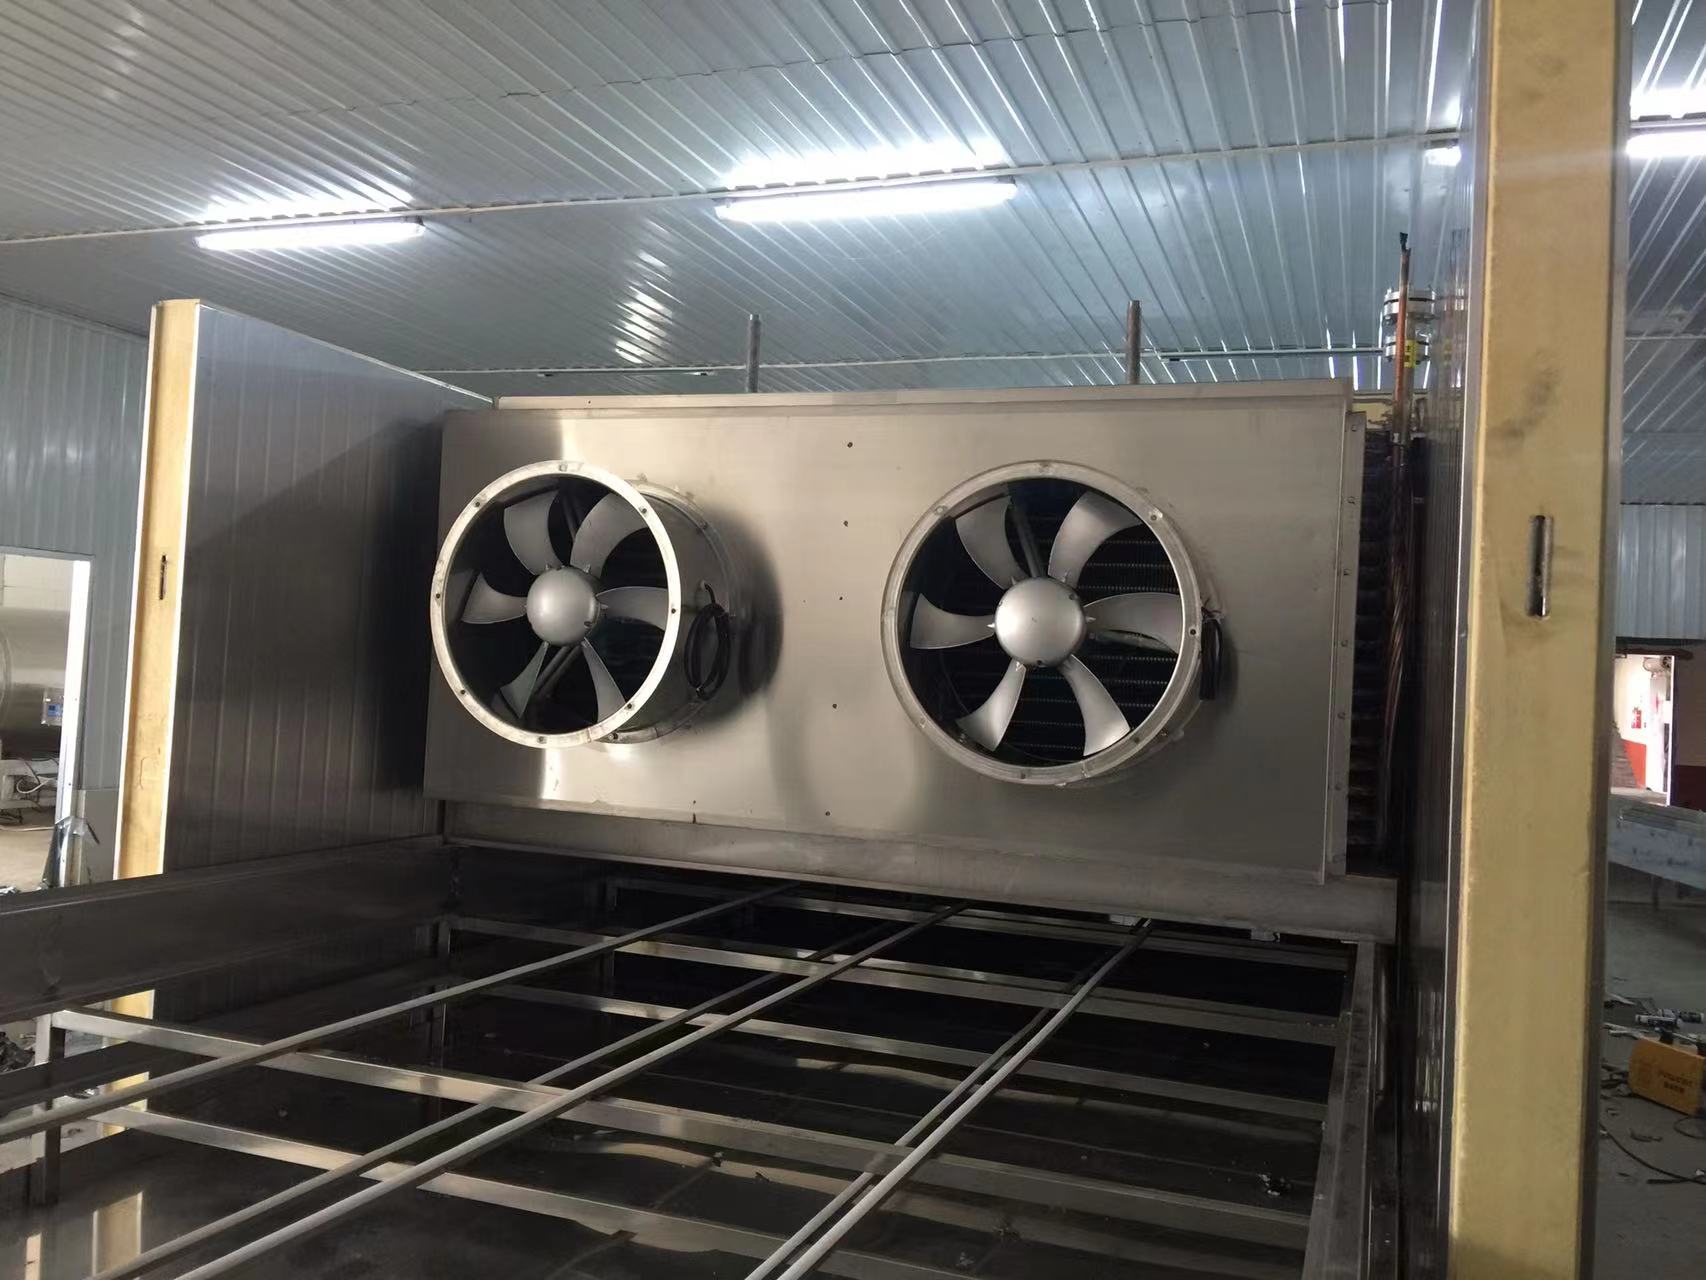 China First Cold Chain IQF Tunnel Freezer FSW400 Type with Freon Refrigerations System for All Kinds of Frozen Food